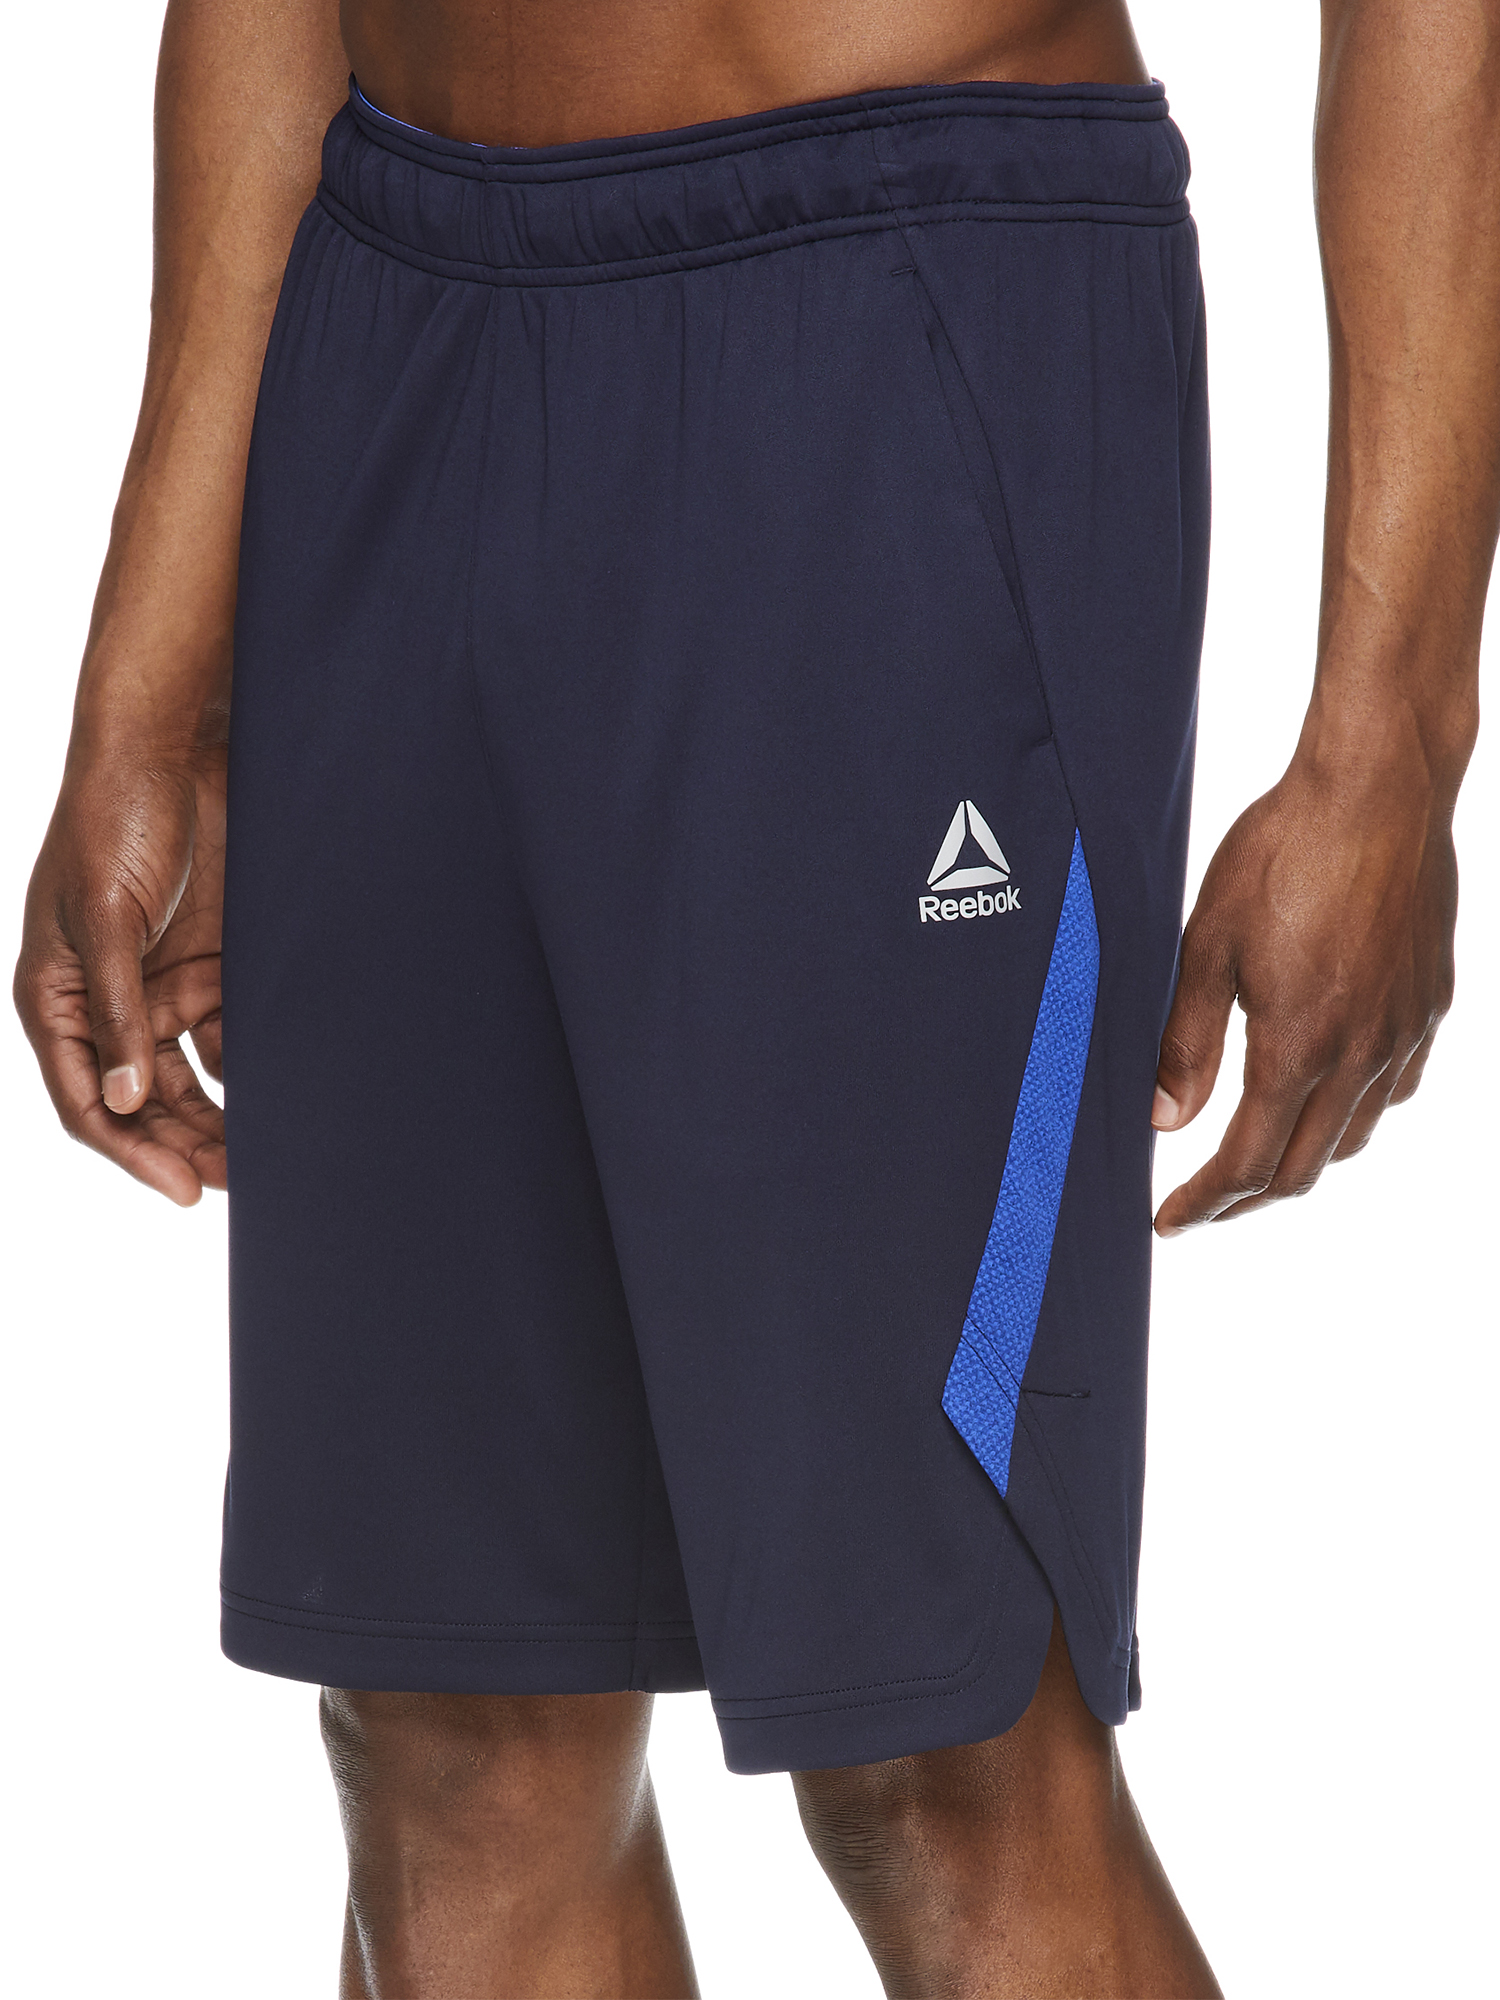 Reebok Men's and Big Men's 9" Free Weight Training Shorts, up to 5XL - image 4 of 4